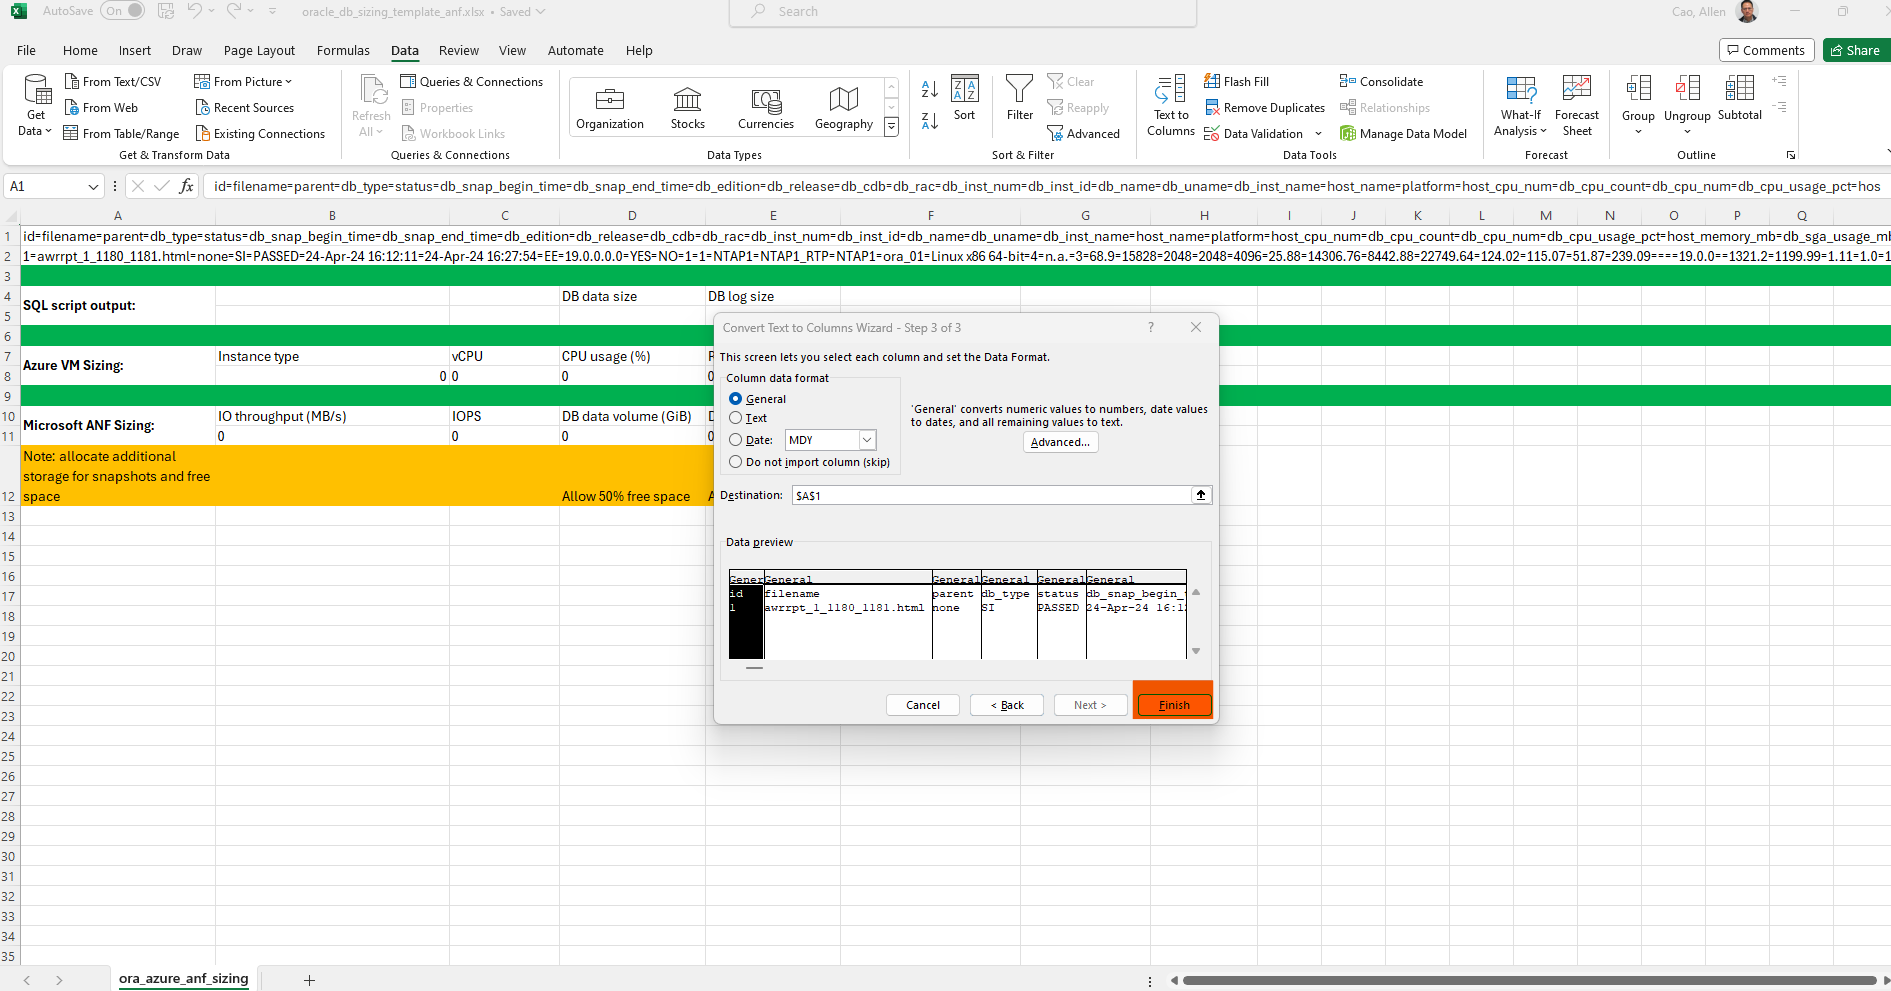 This image provides excel template screen shot for Oracle sizing